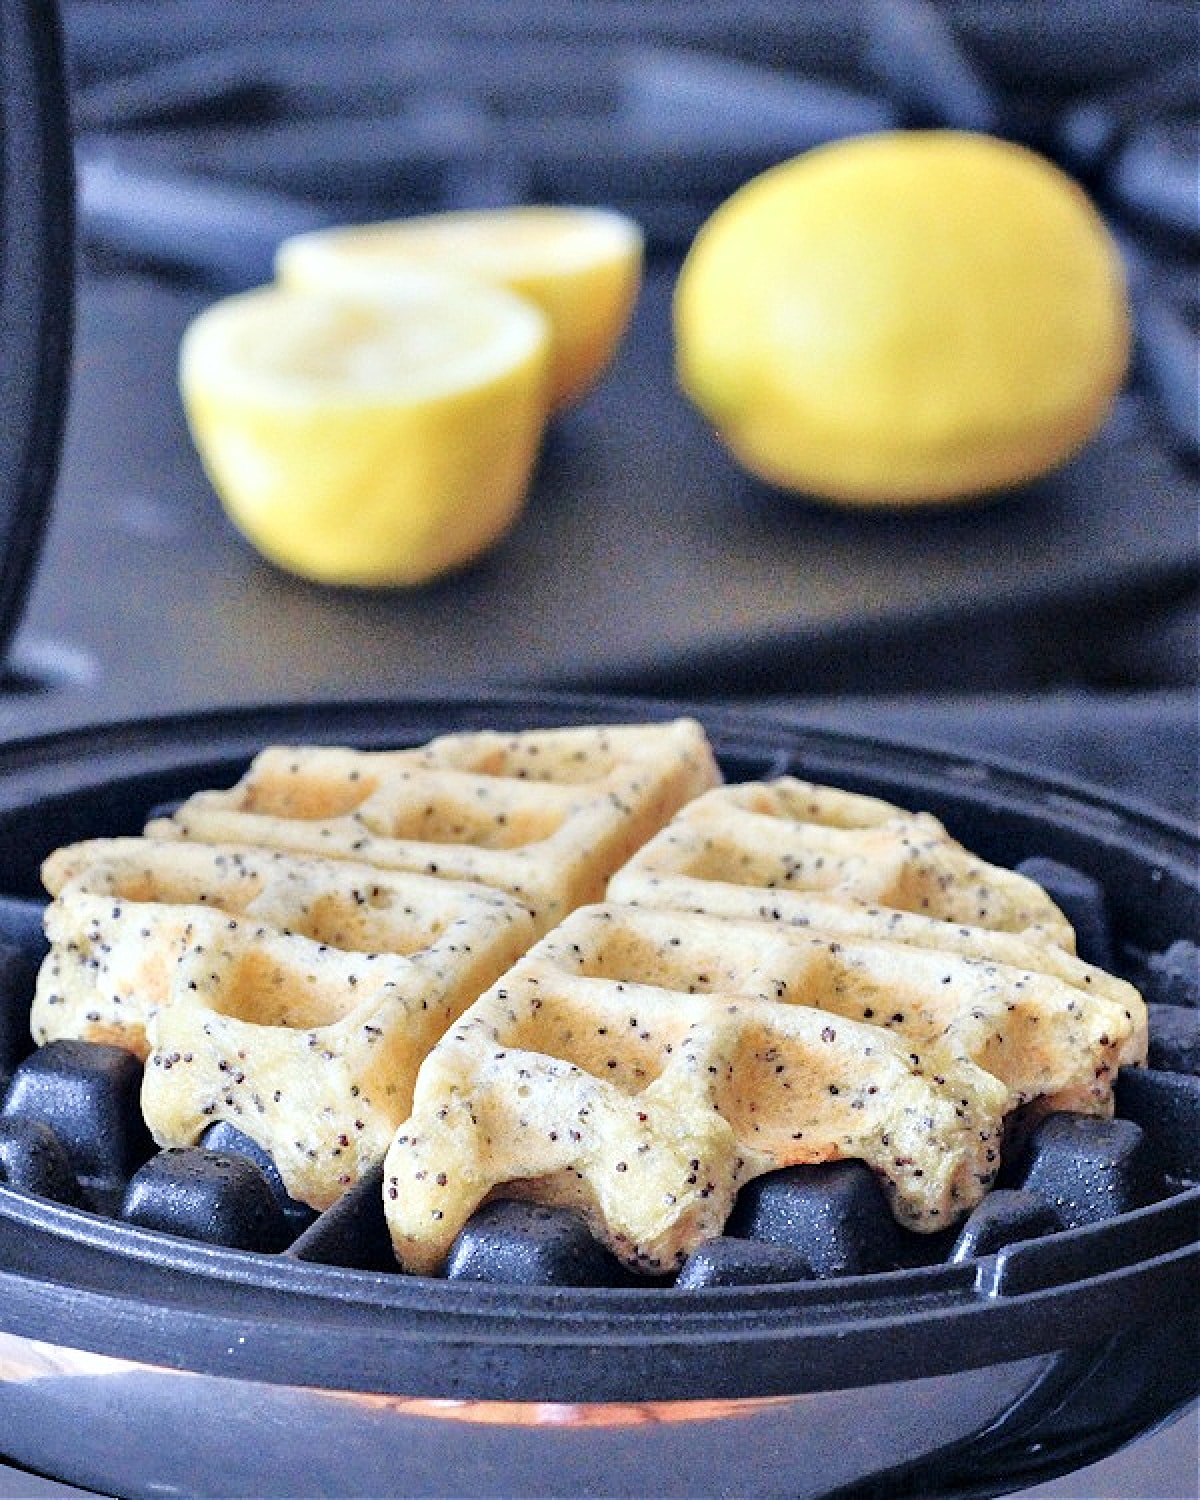 One full Belgian style lemon poppyseed waffle sits in the waffle maker. A whole lemon and one lemon cut in half sits blurred in the background.